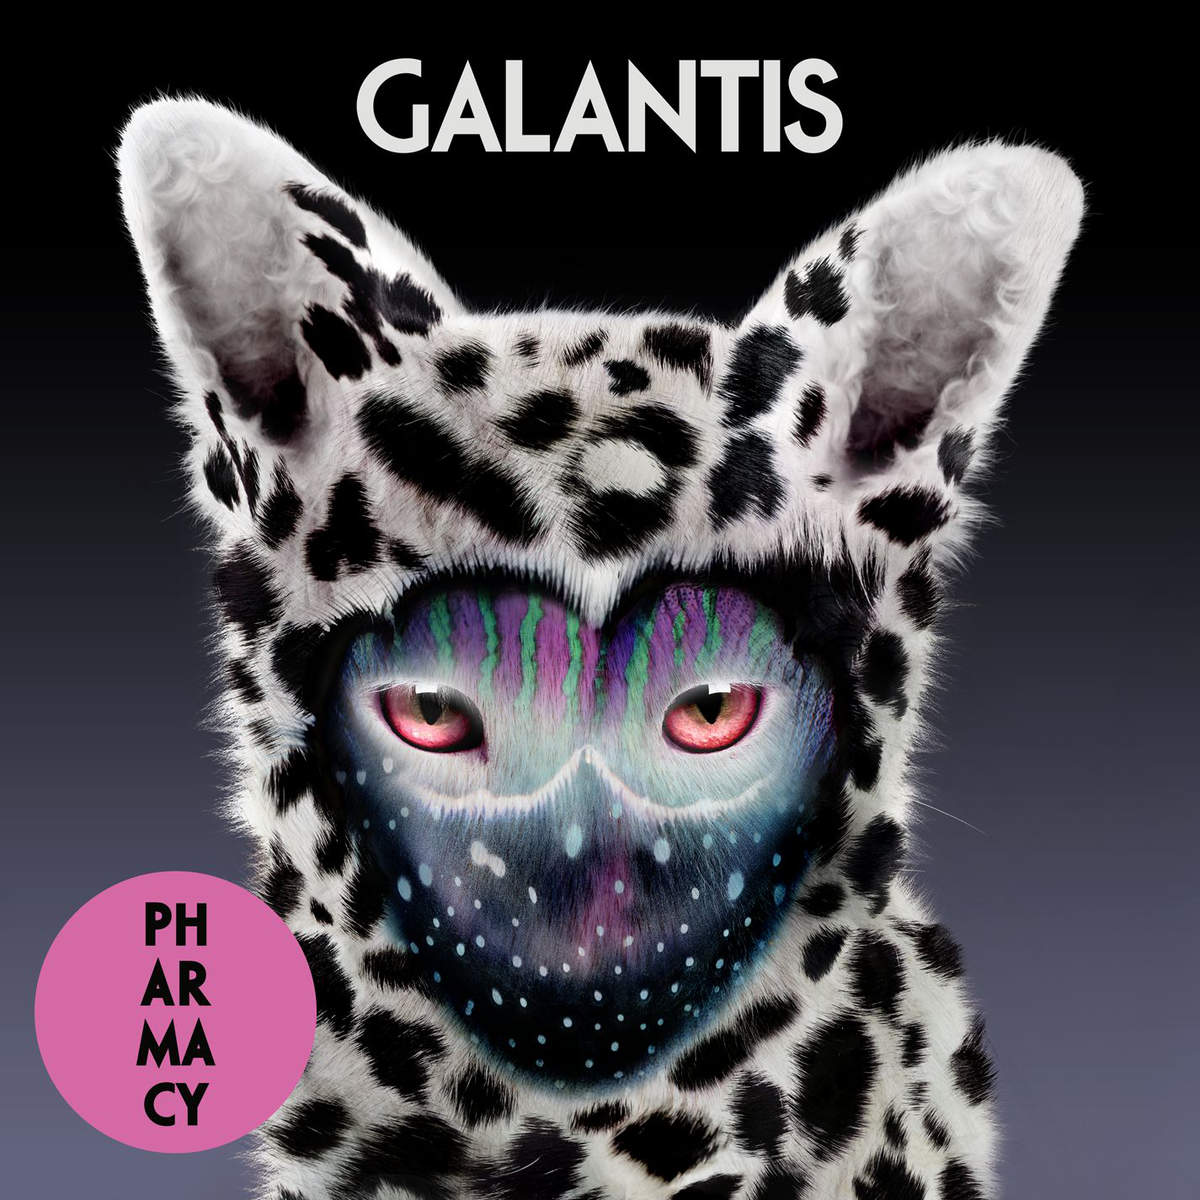 Ultimate Music Galantis Pharmacy Available On Itunes